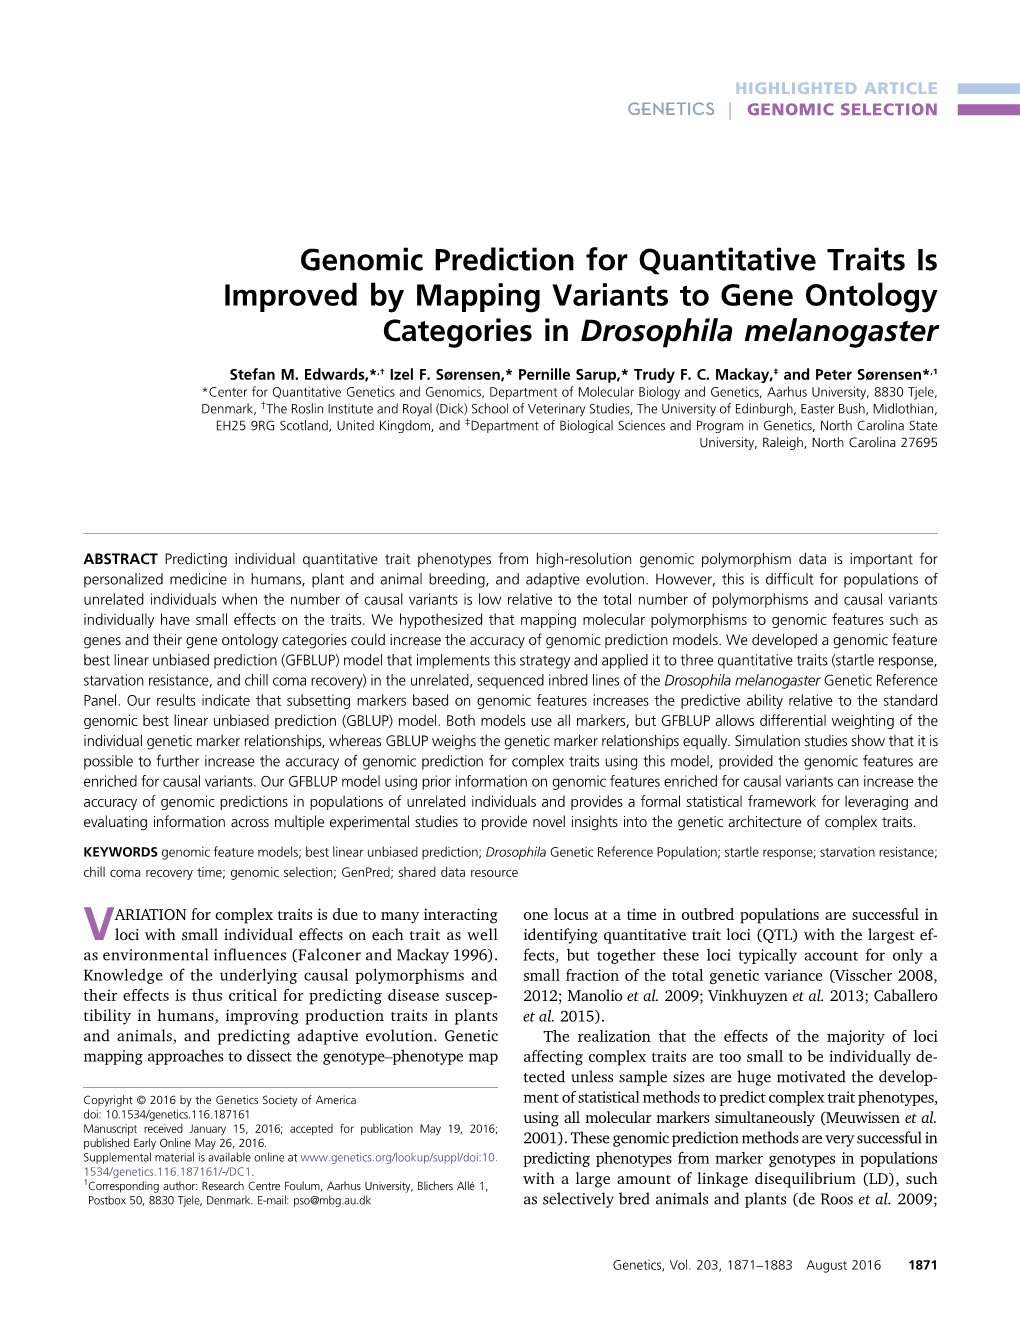 Genomic Prediction for Quantitative Traits Is Improved by Mapping Variants to Gene Ontology Categories in Drosophila Melanogaster